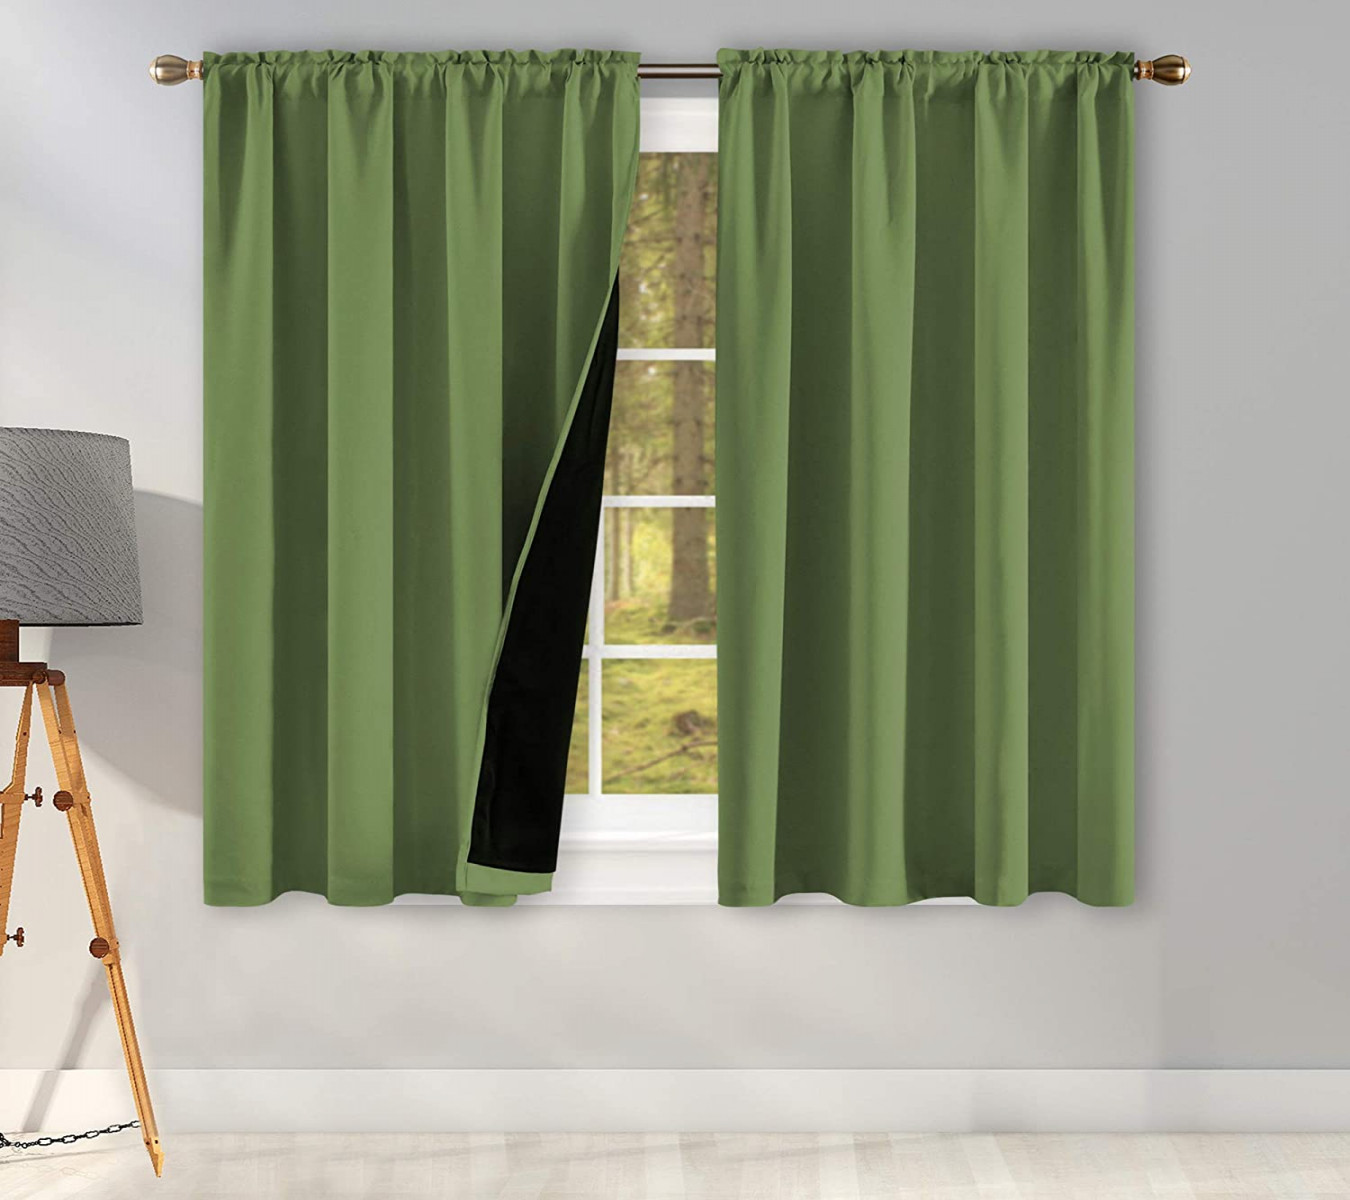 Pack " Length Nursery Blackout Curtains -  Thick Layers Fully  Blackout Thermal Insulated Black Lined Curtains for Small Windows with Rod  Pocket